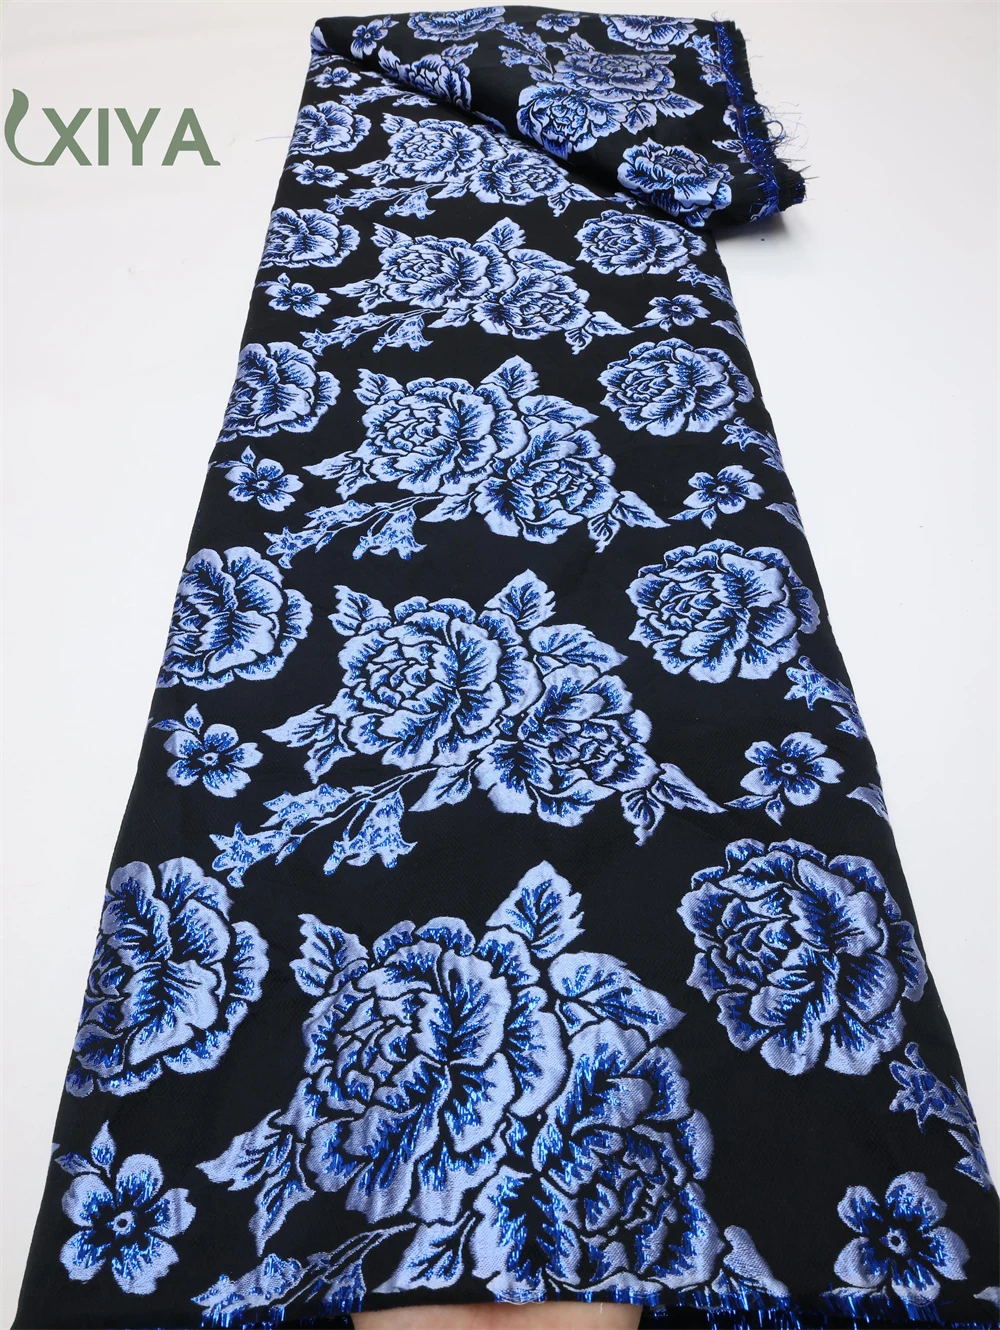 XIYA Blue 2022 High Quality African Brocade Lace Material French Nigerian Flowers Lace Fabrics For Wedding Dress Sewing LY672-3